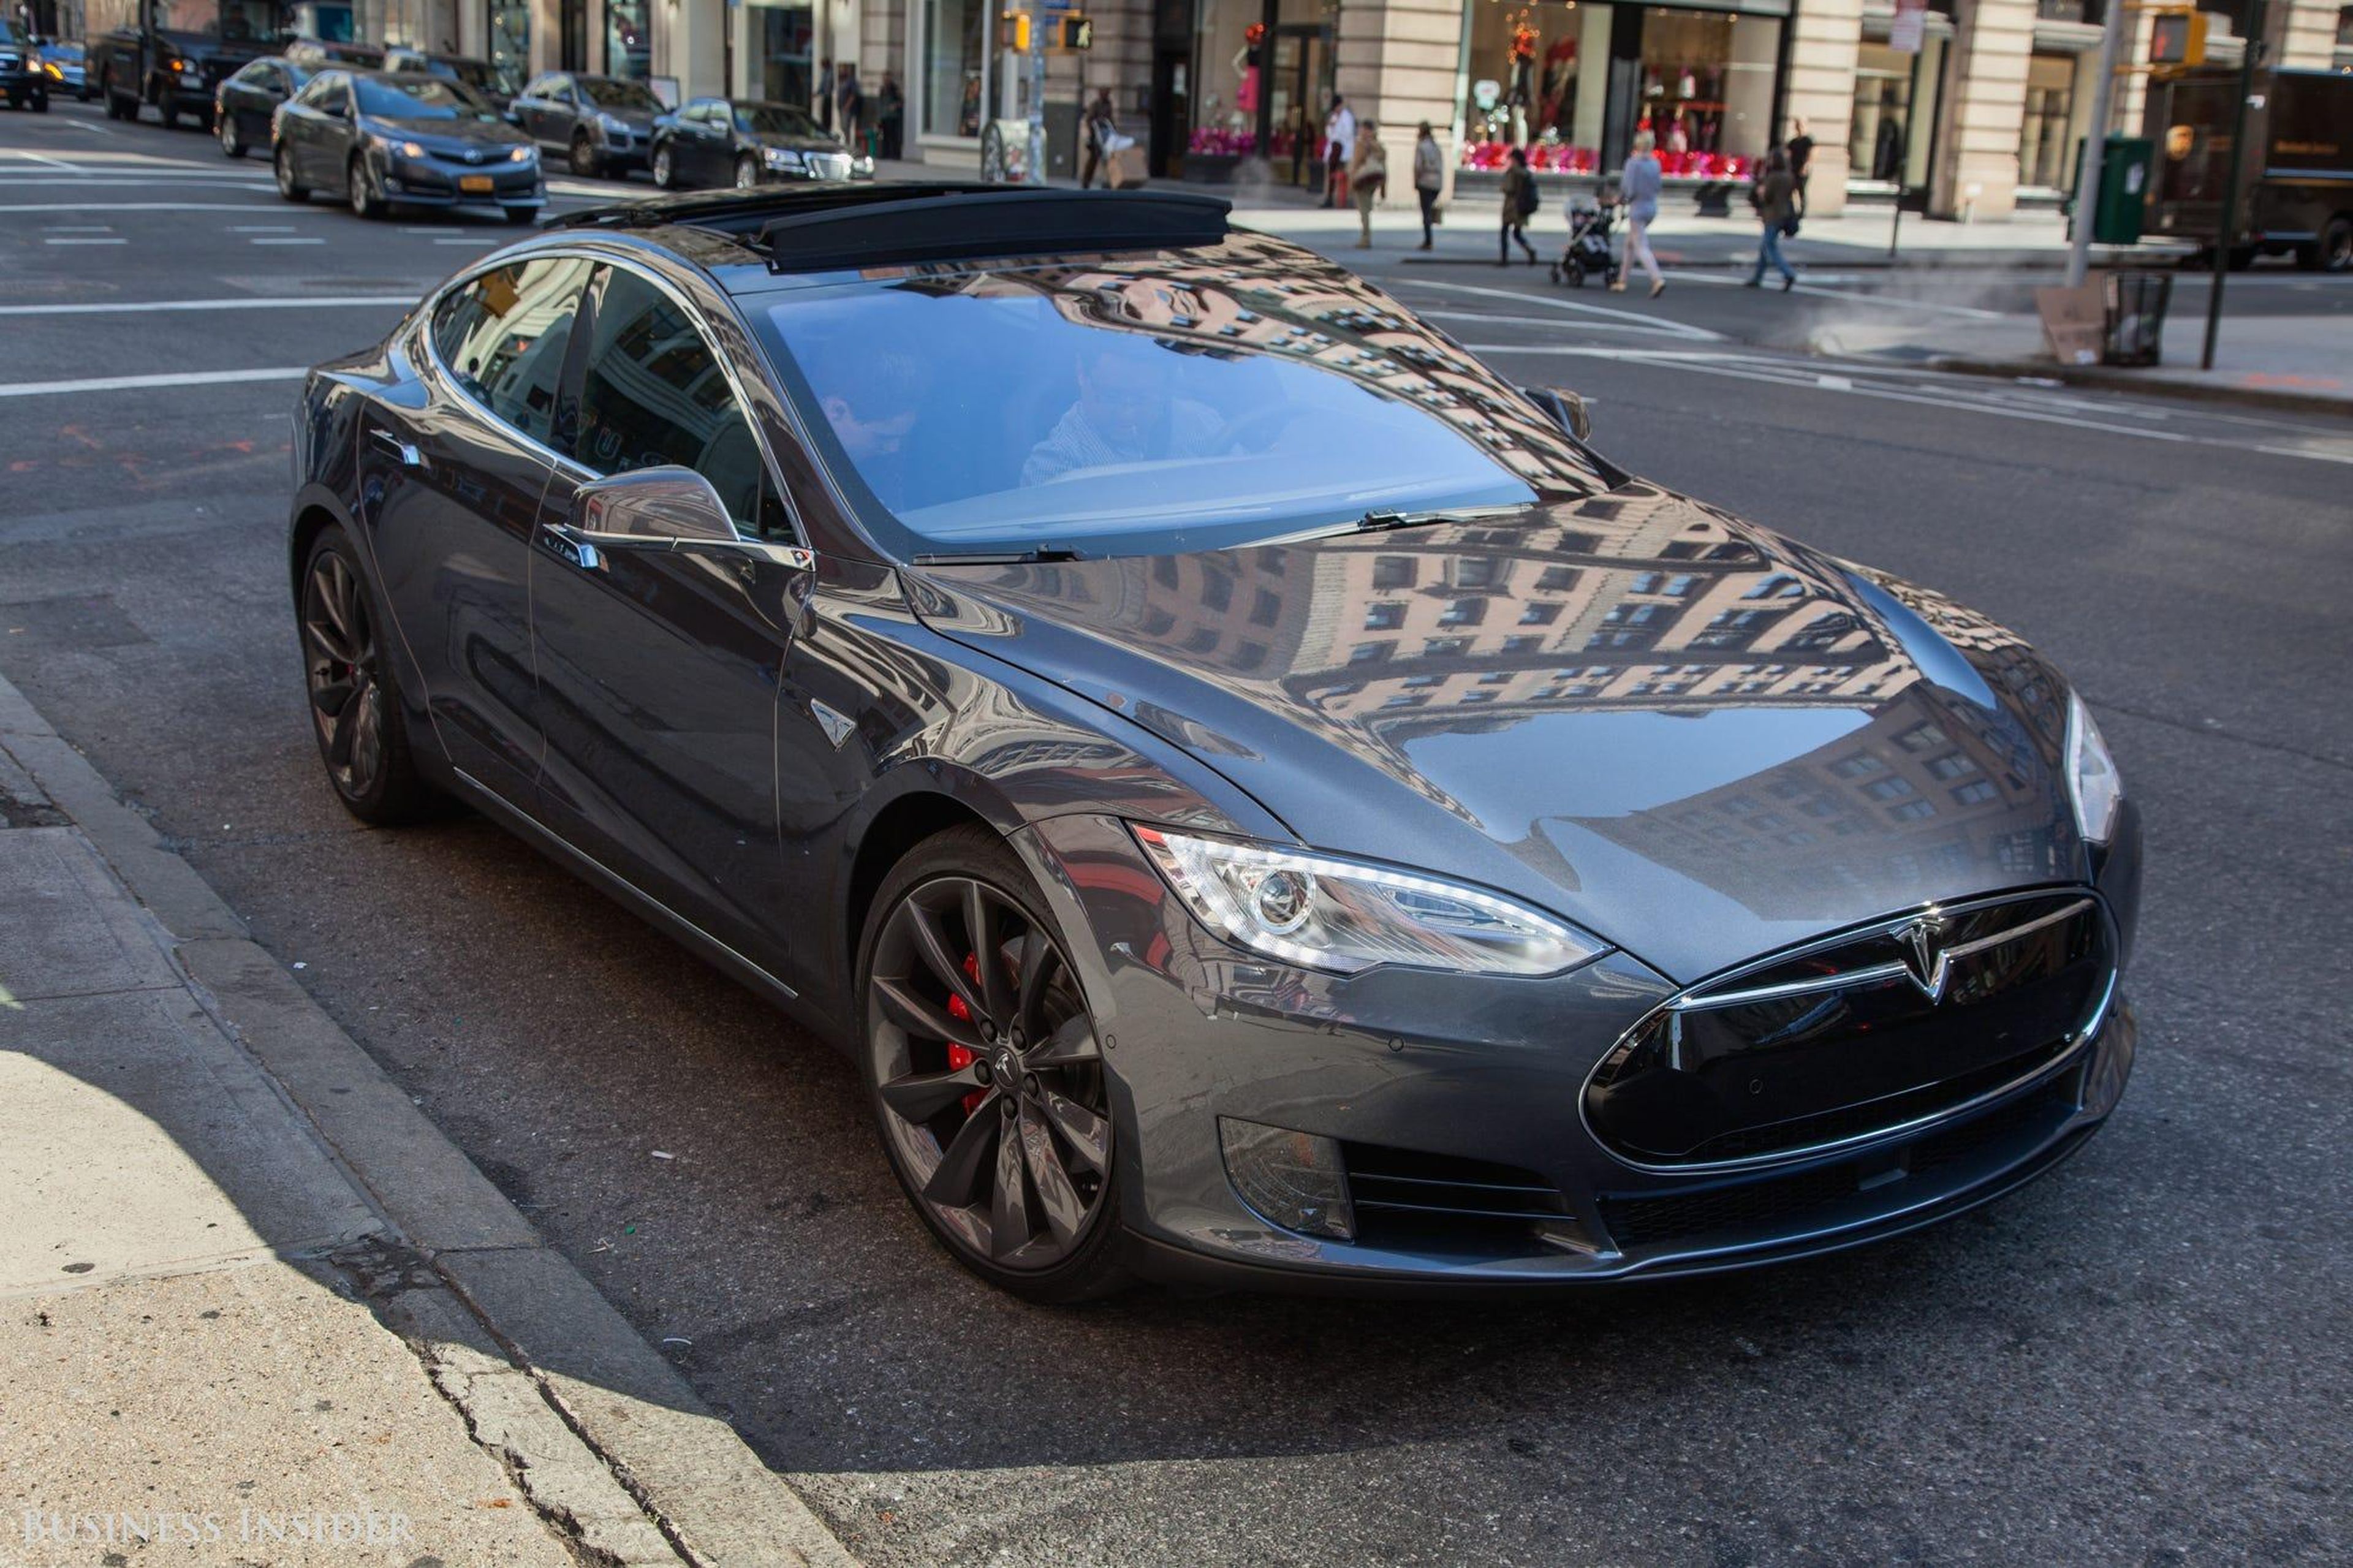 The Model S is Tesla's oldest vehicle now in production. The mid-size sedan arrived in 2012 and has been updated and reconfigured numerous times, but the average price is around $100,000.